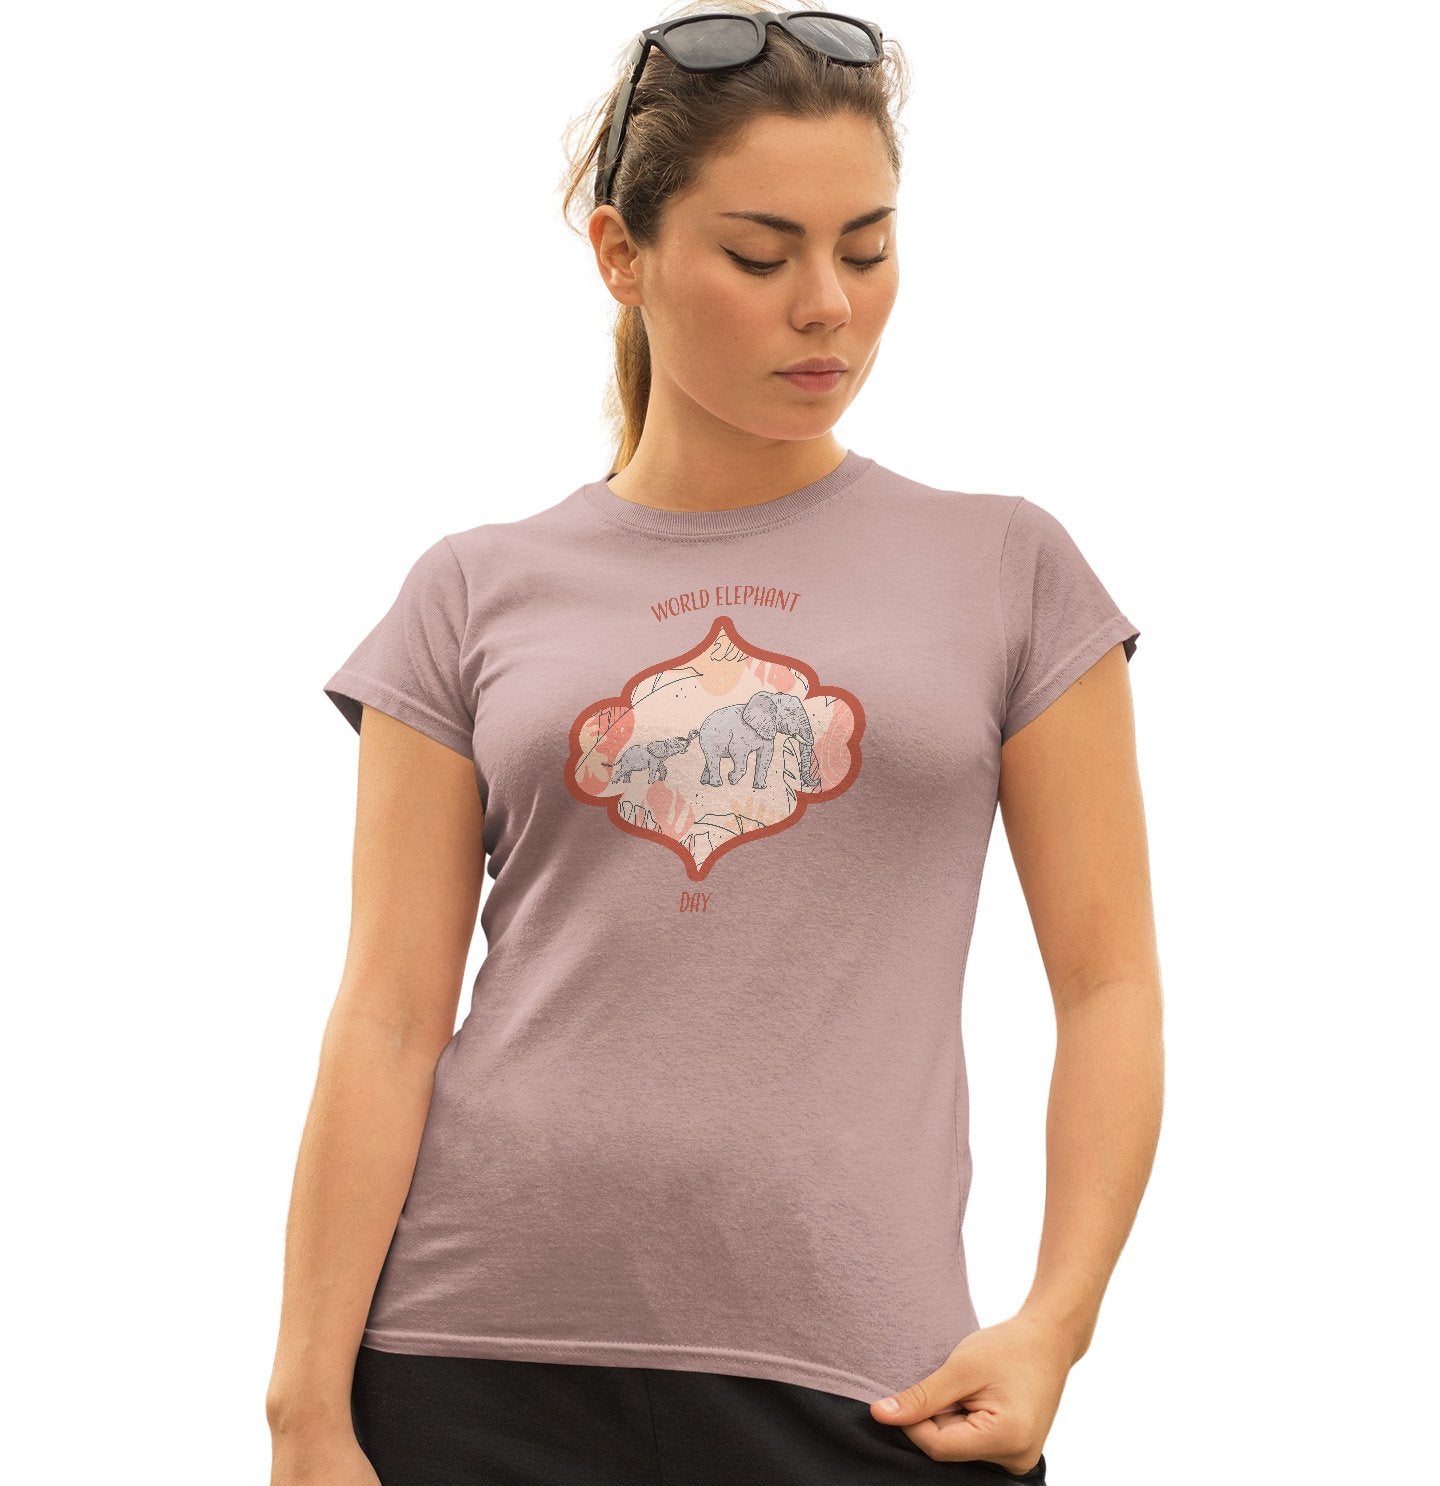 Animal Pride - World Elephant Day - Women's Fitted T-Shirt